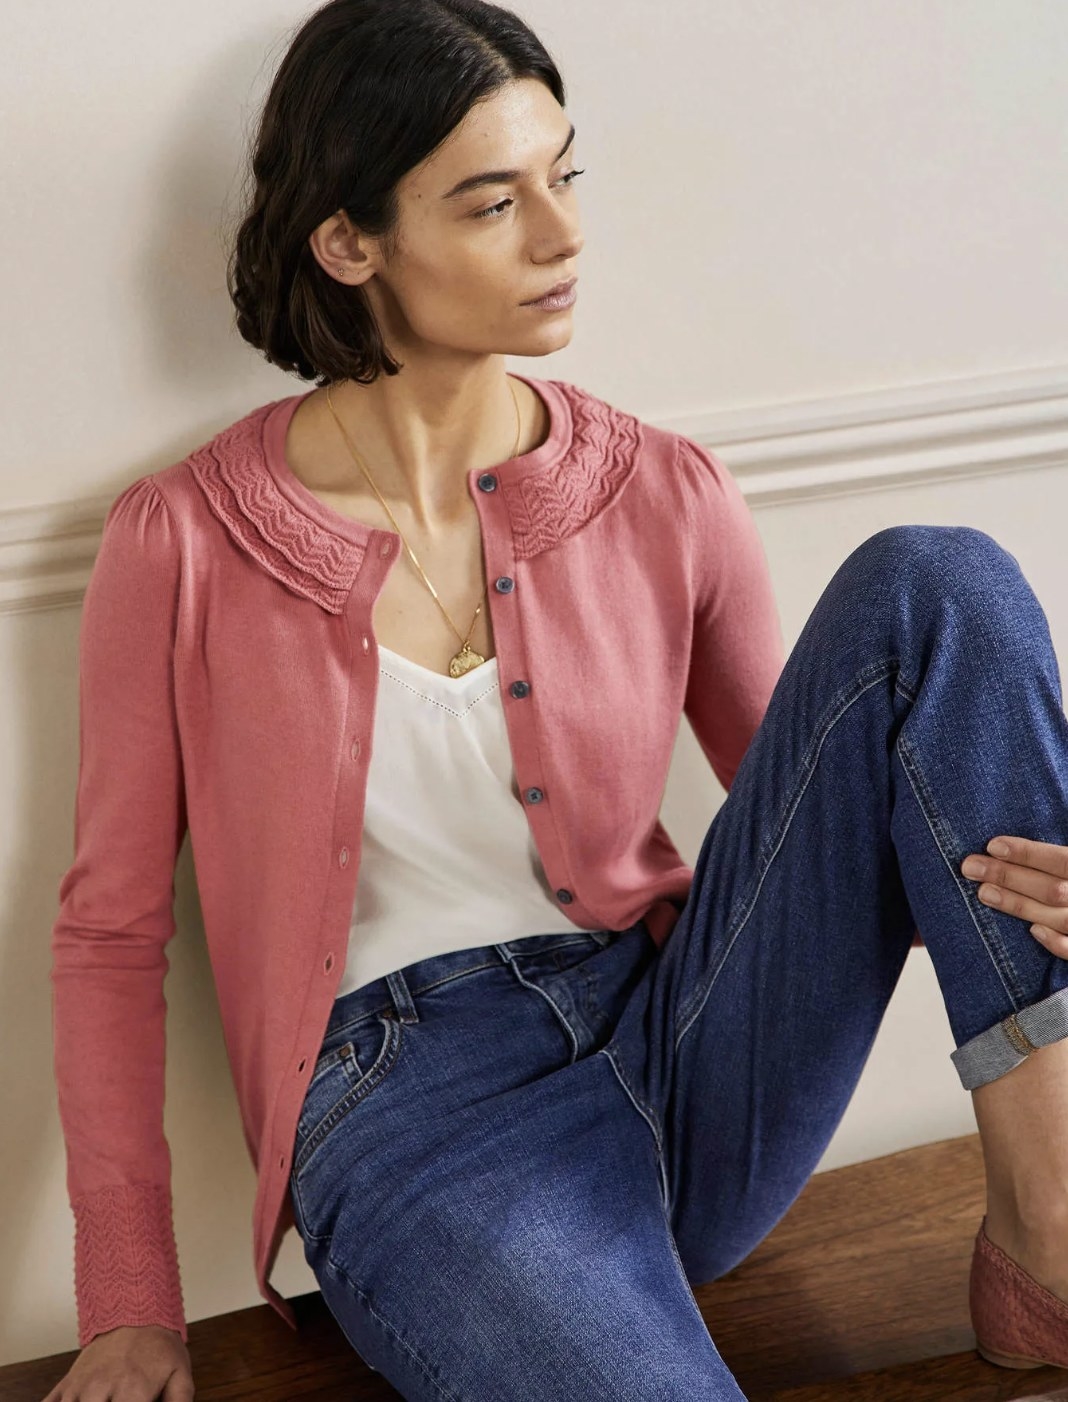 Model sitting against a wall wearing the pink button-up cardigan over a white tank